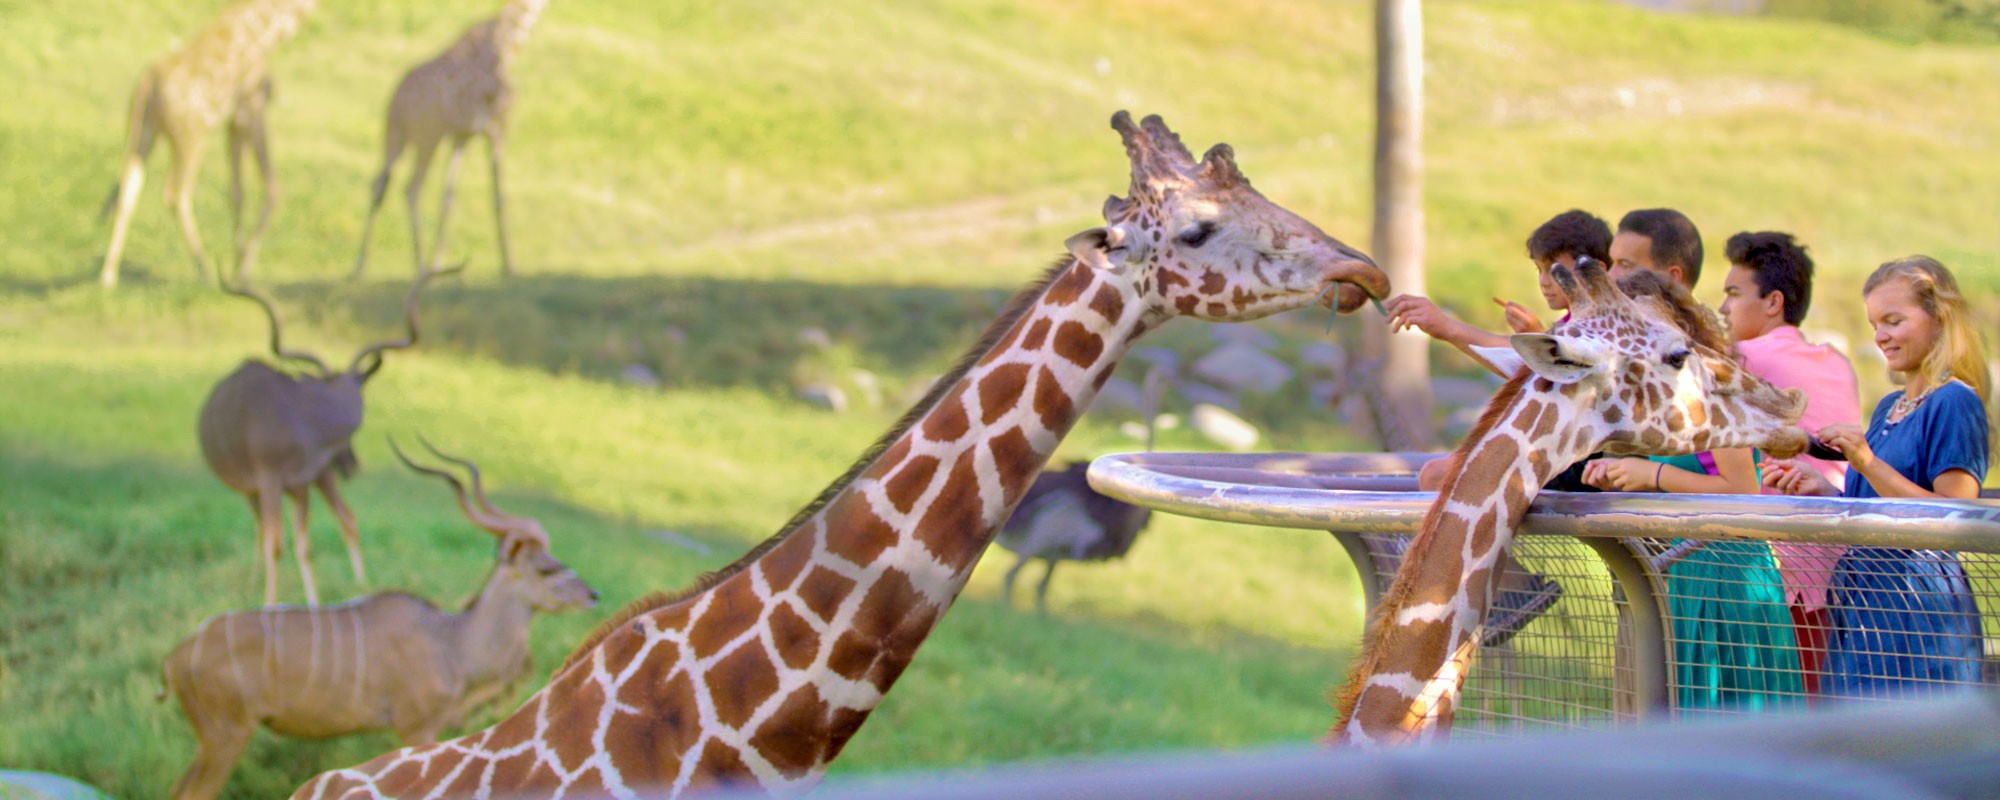 Explore the variety of things to do when visiting The Living Desert Zoo and Gardens.